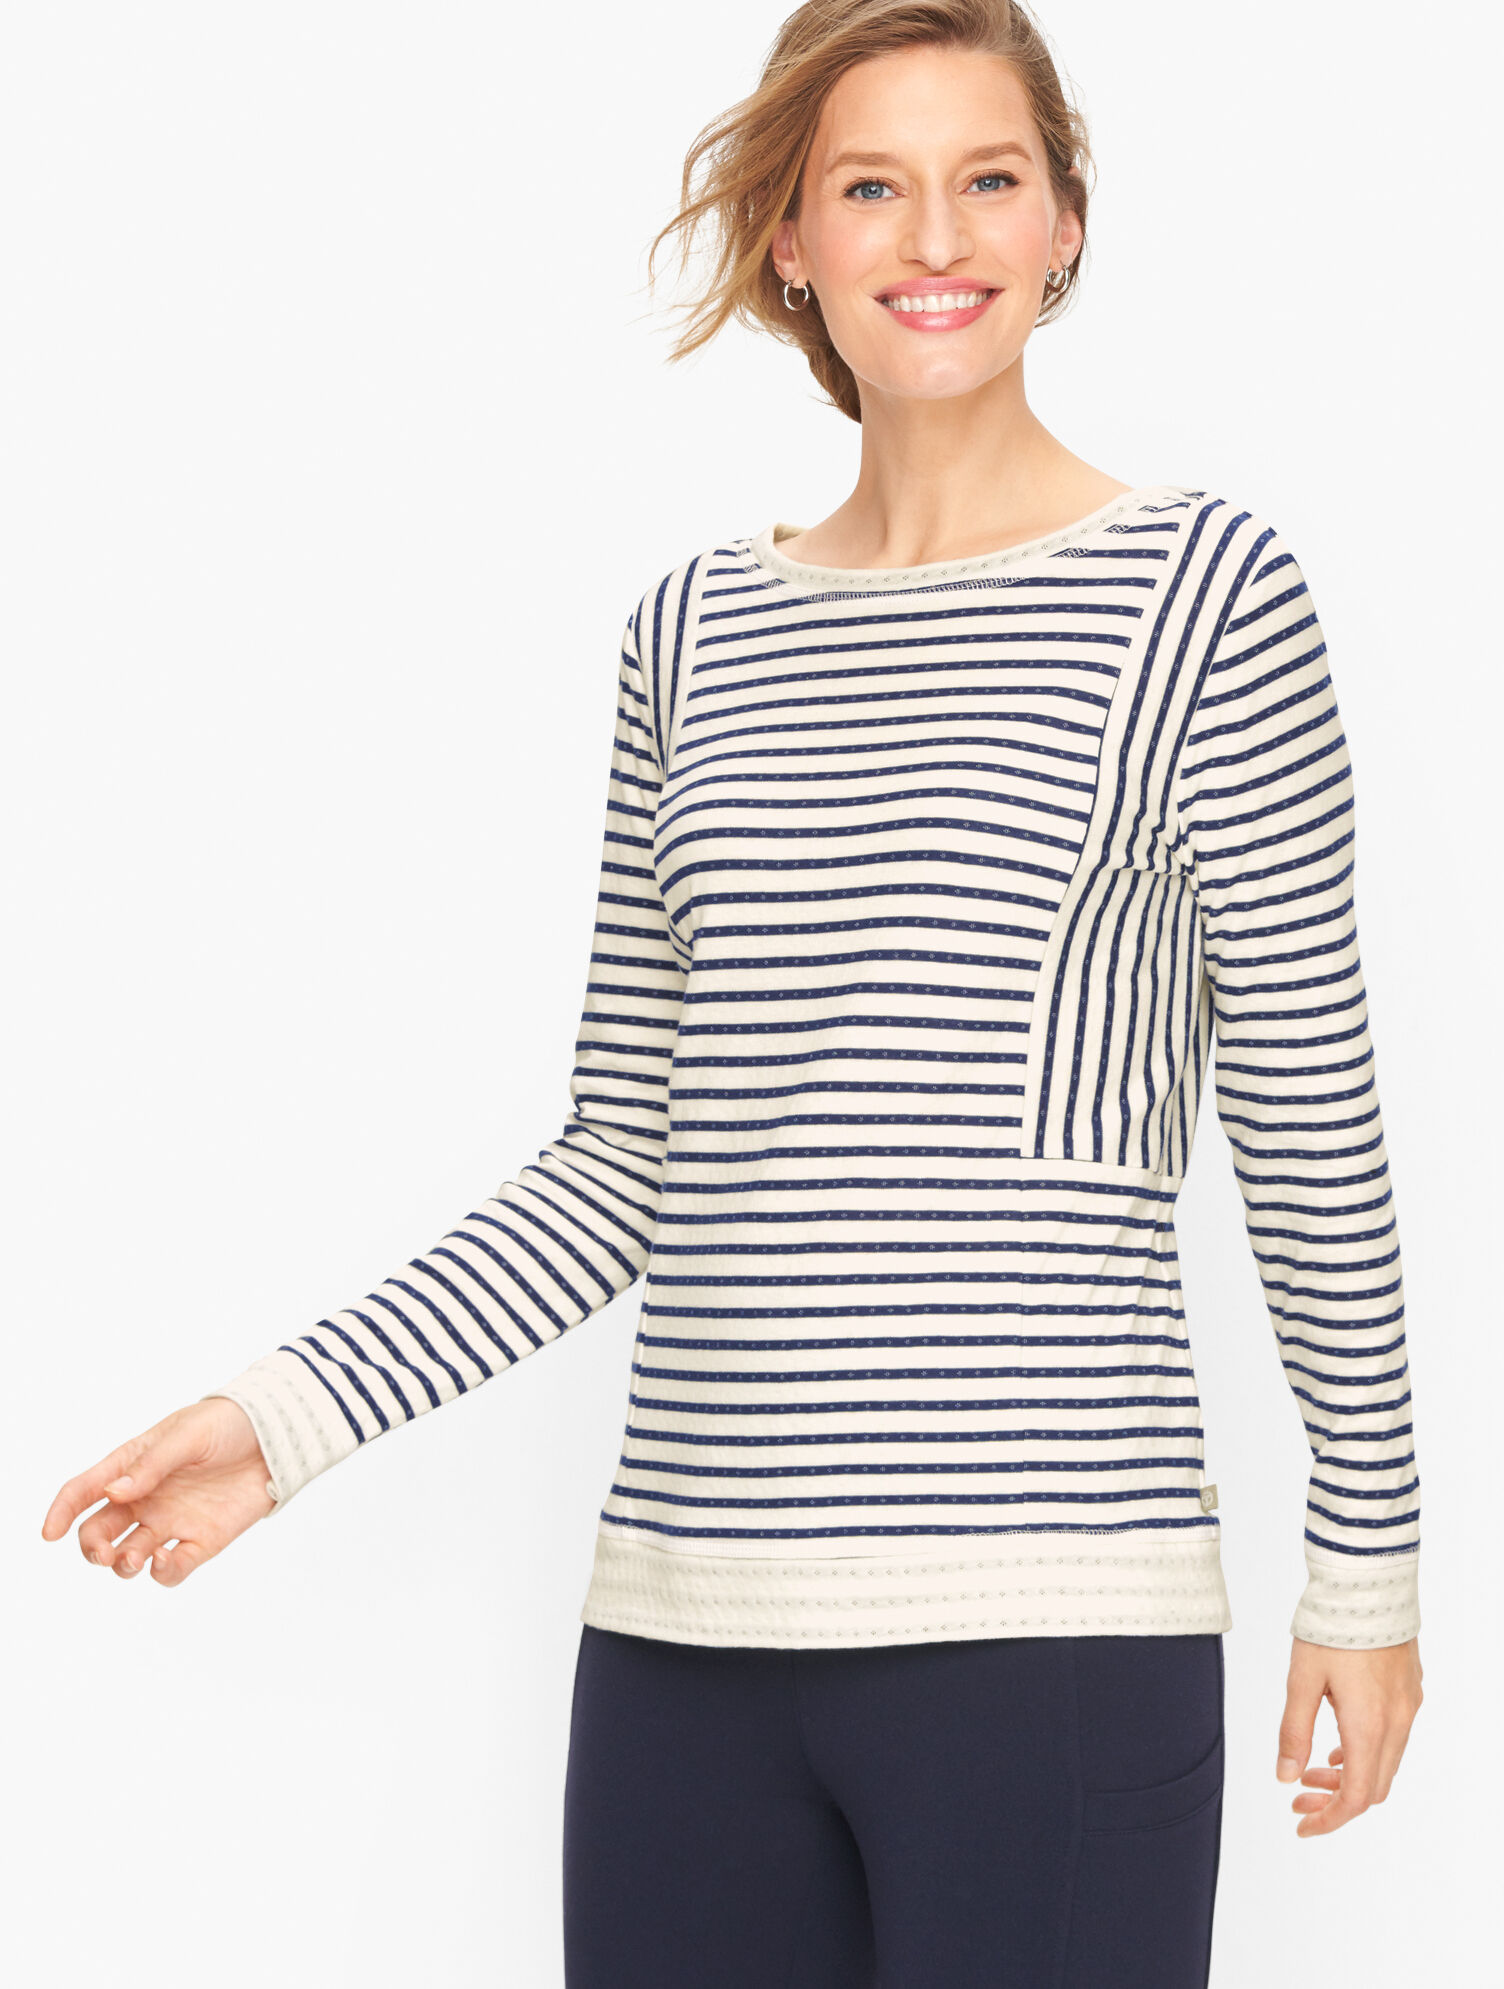 Mixed Stripe Pullover | Talbots